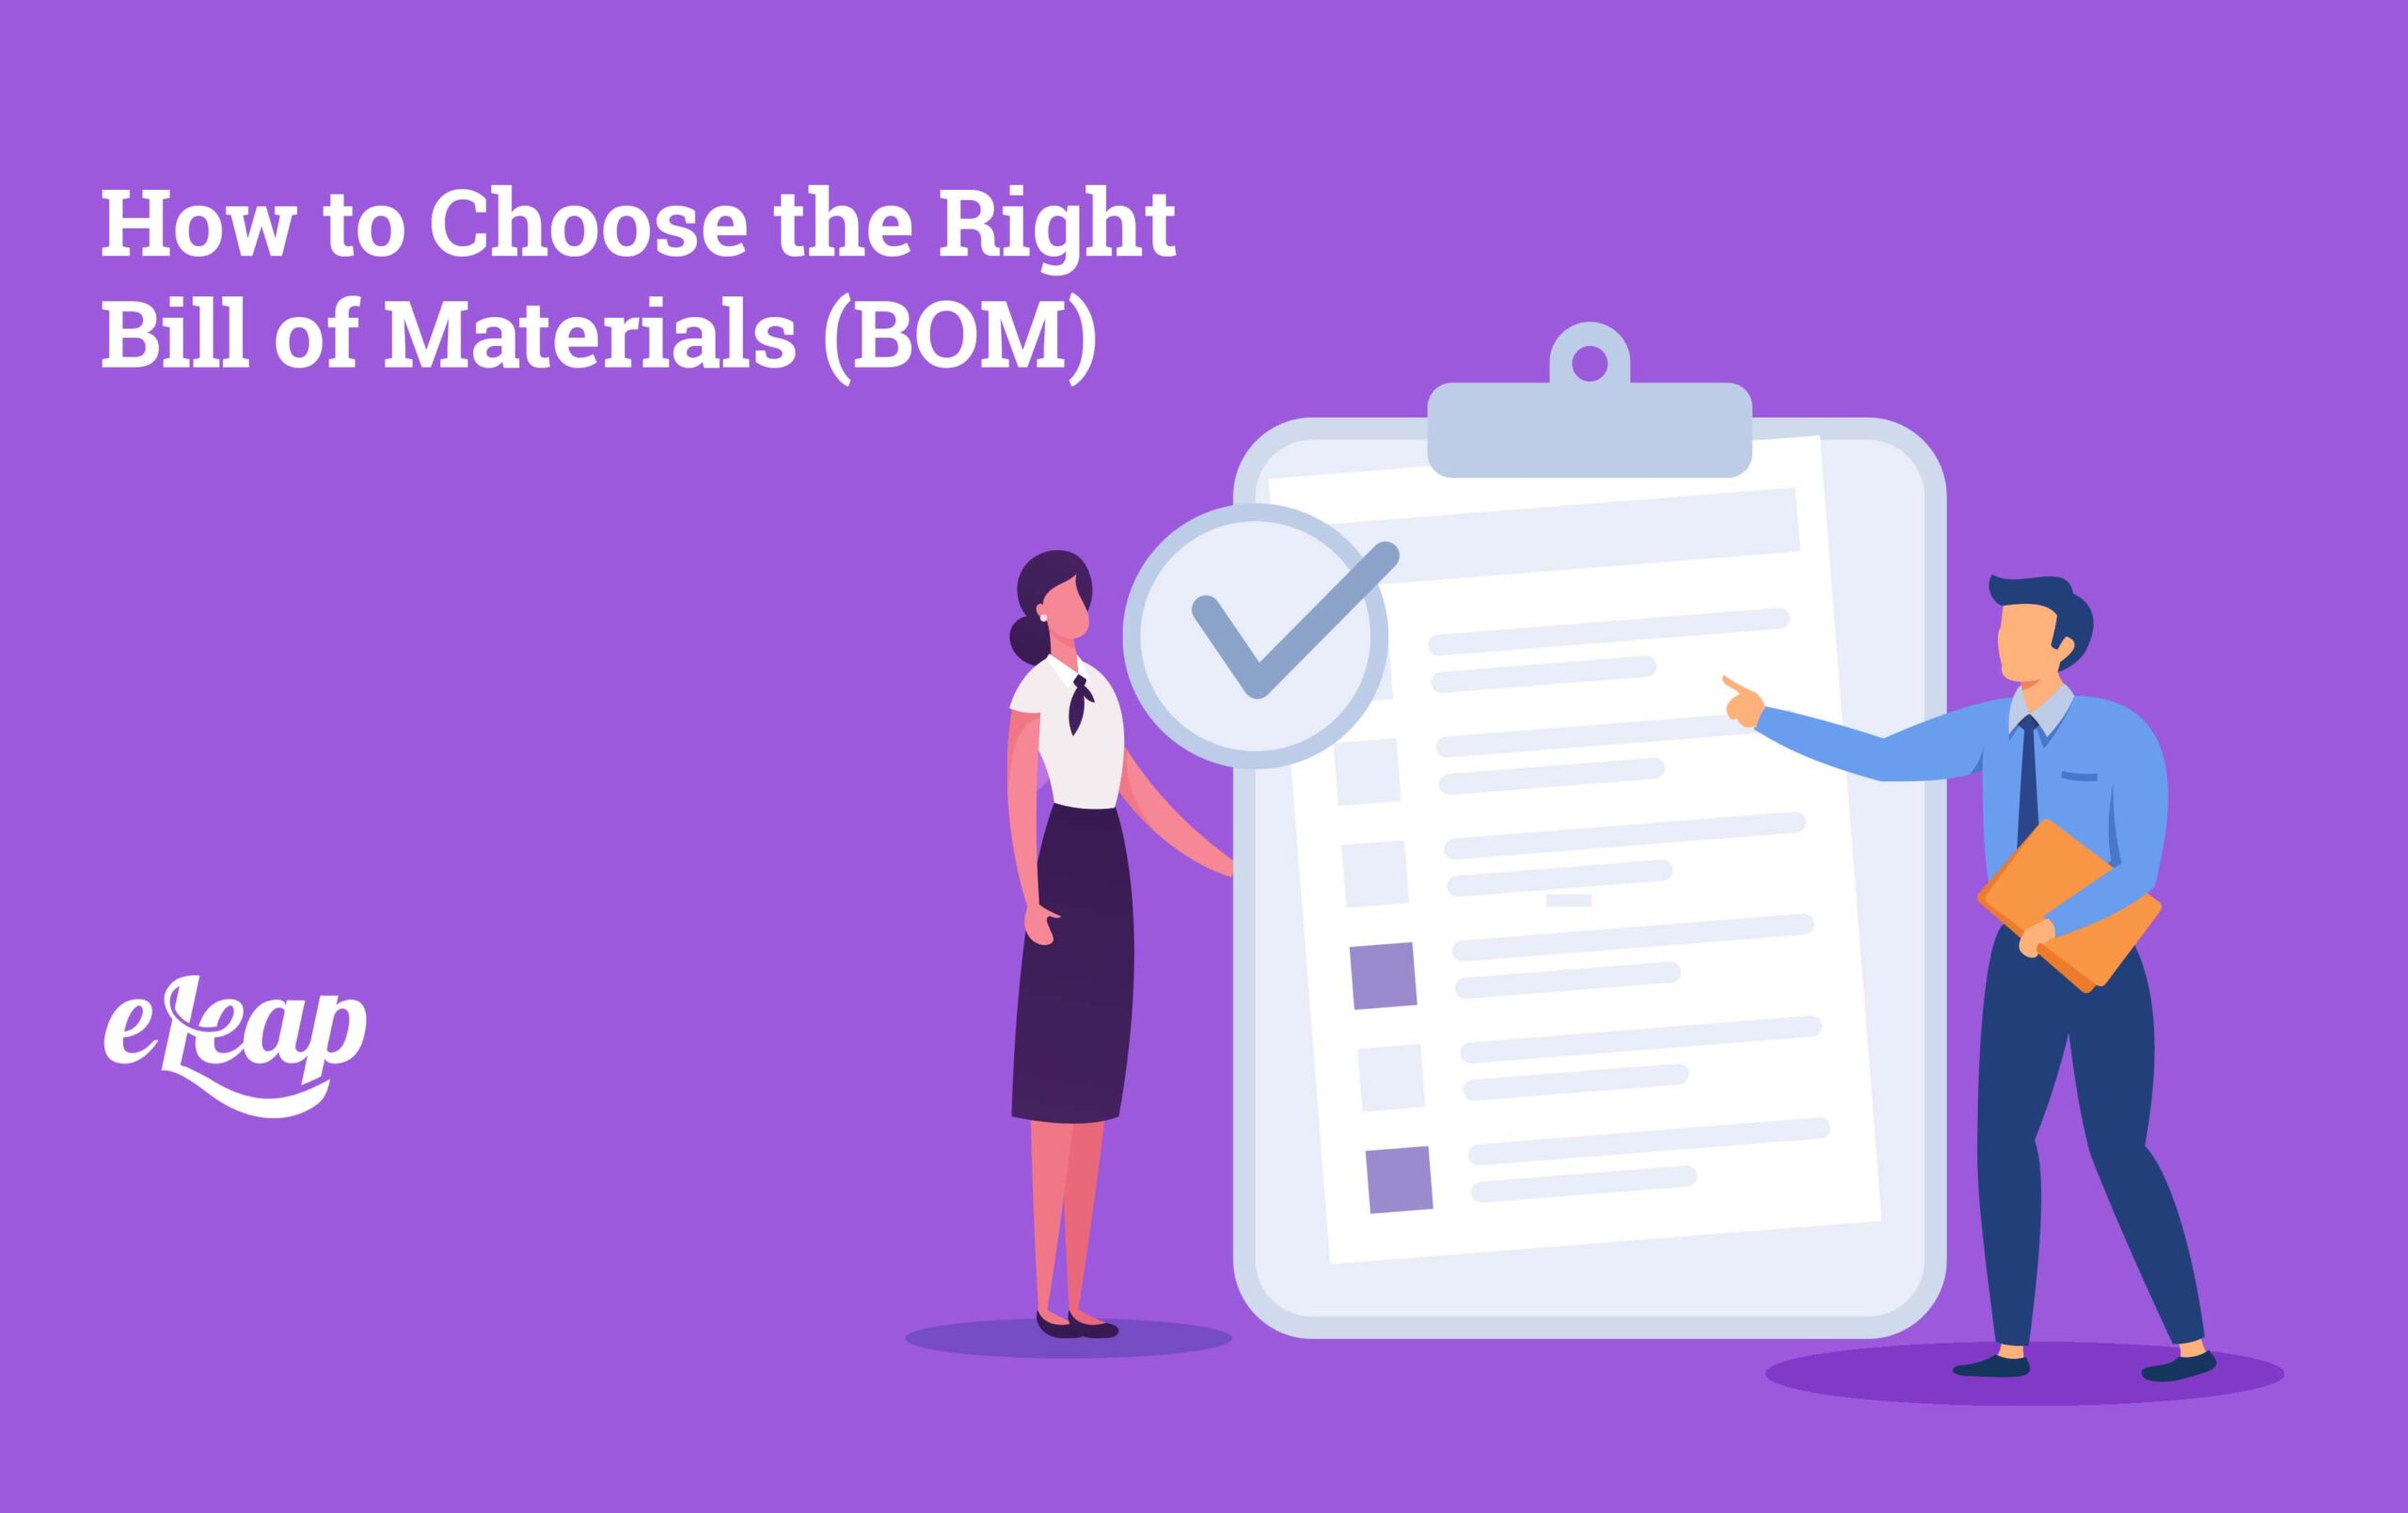 How to Choose the Right Bill of Materials (BOM)